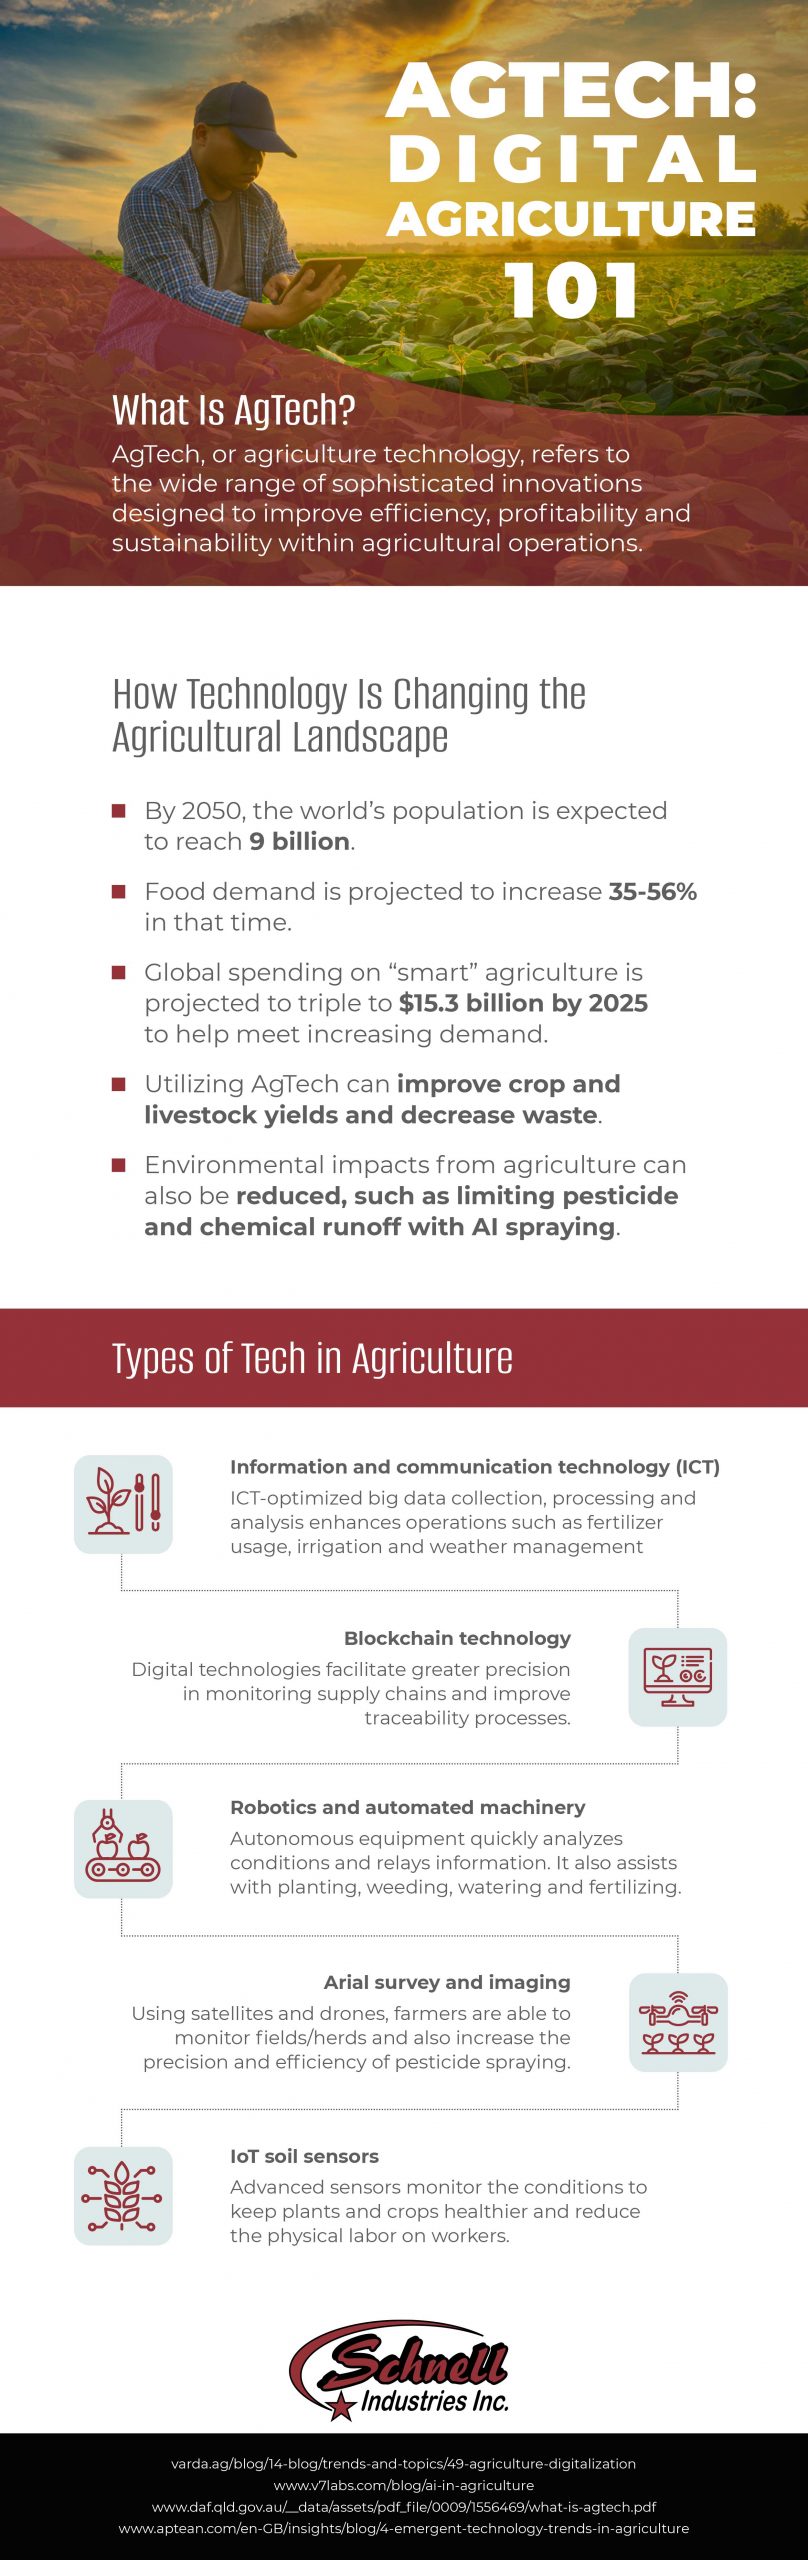 digital agriculture 101 schnell infographic